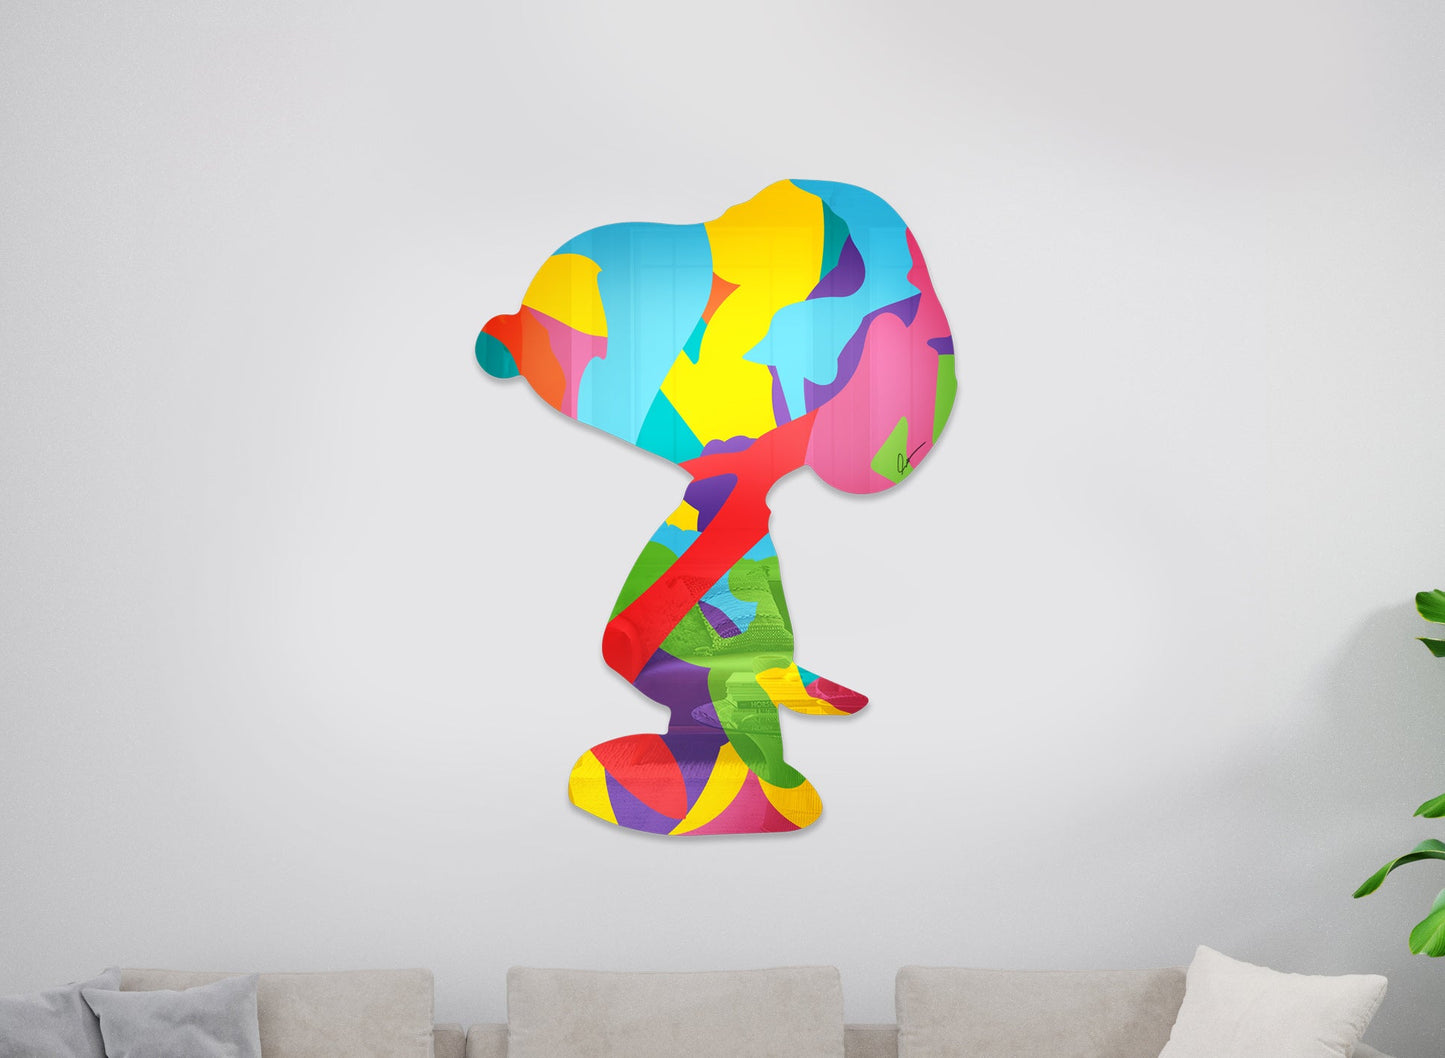 Snoopy Mirrors Sculpture